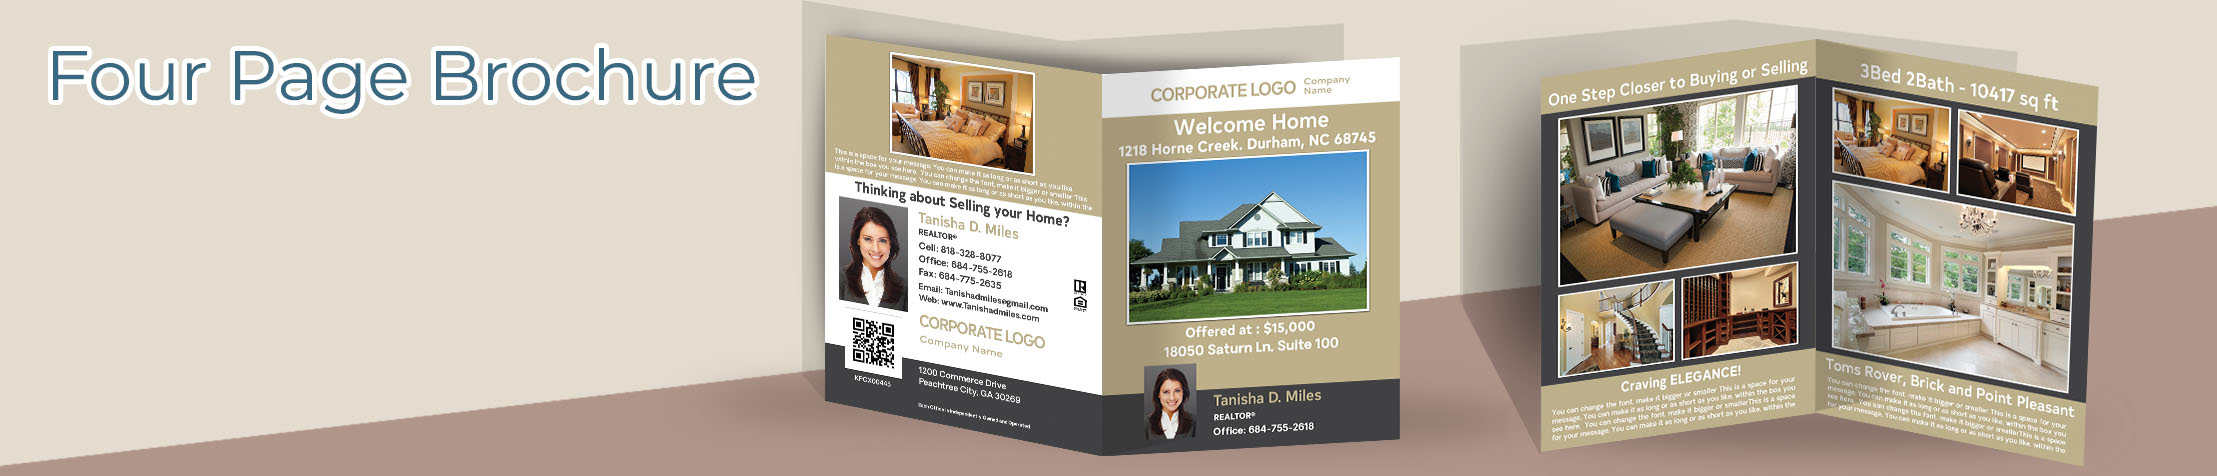 Century 21 Real Estate Flyers and Brochures - Century 21 four page brochure templates for open houses and marketing | BestPrintBuy.com